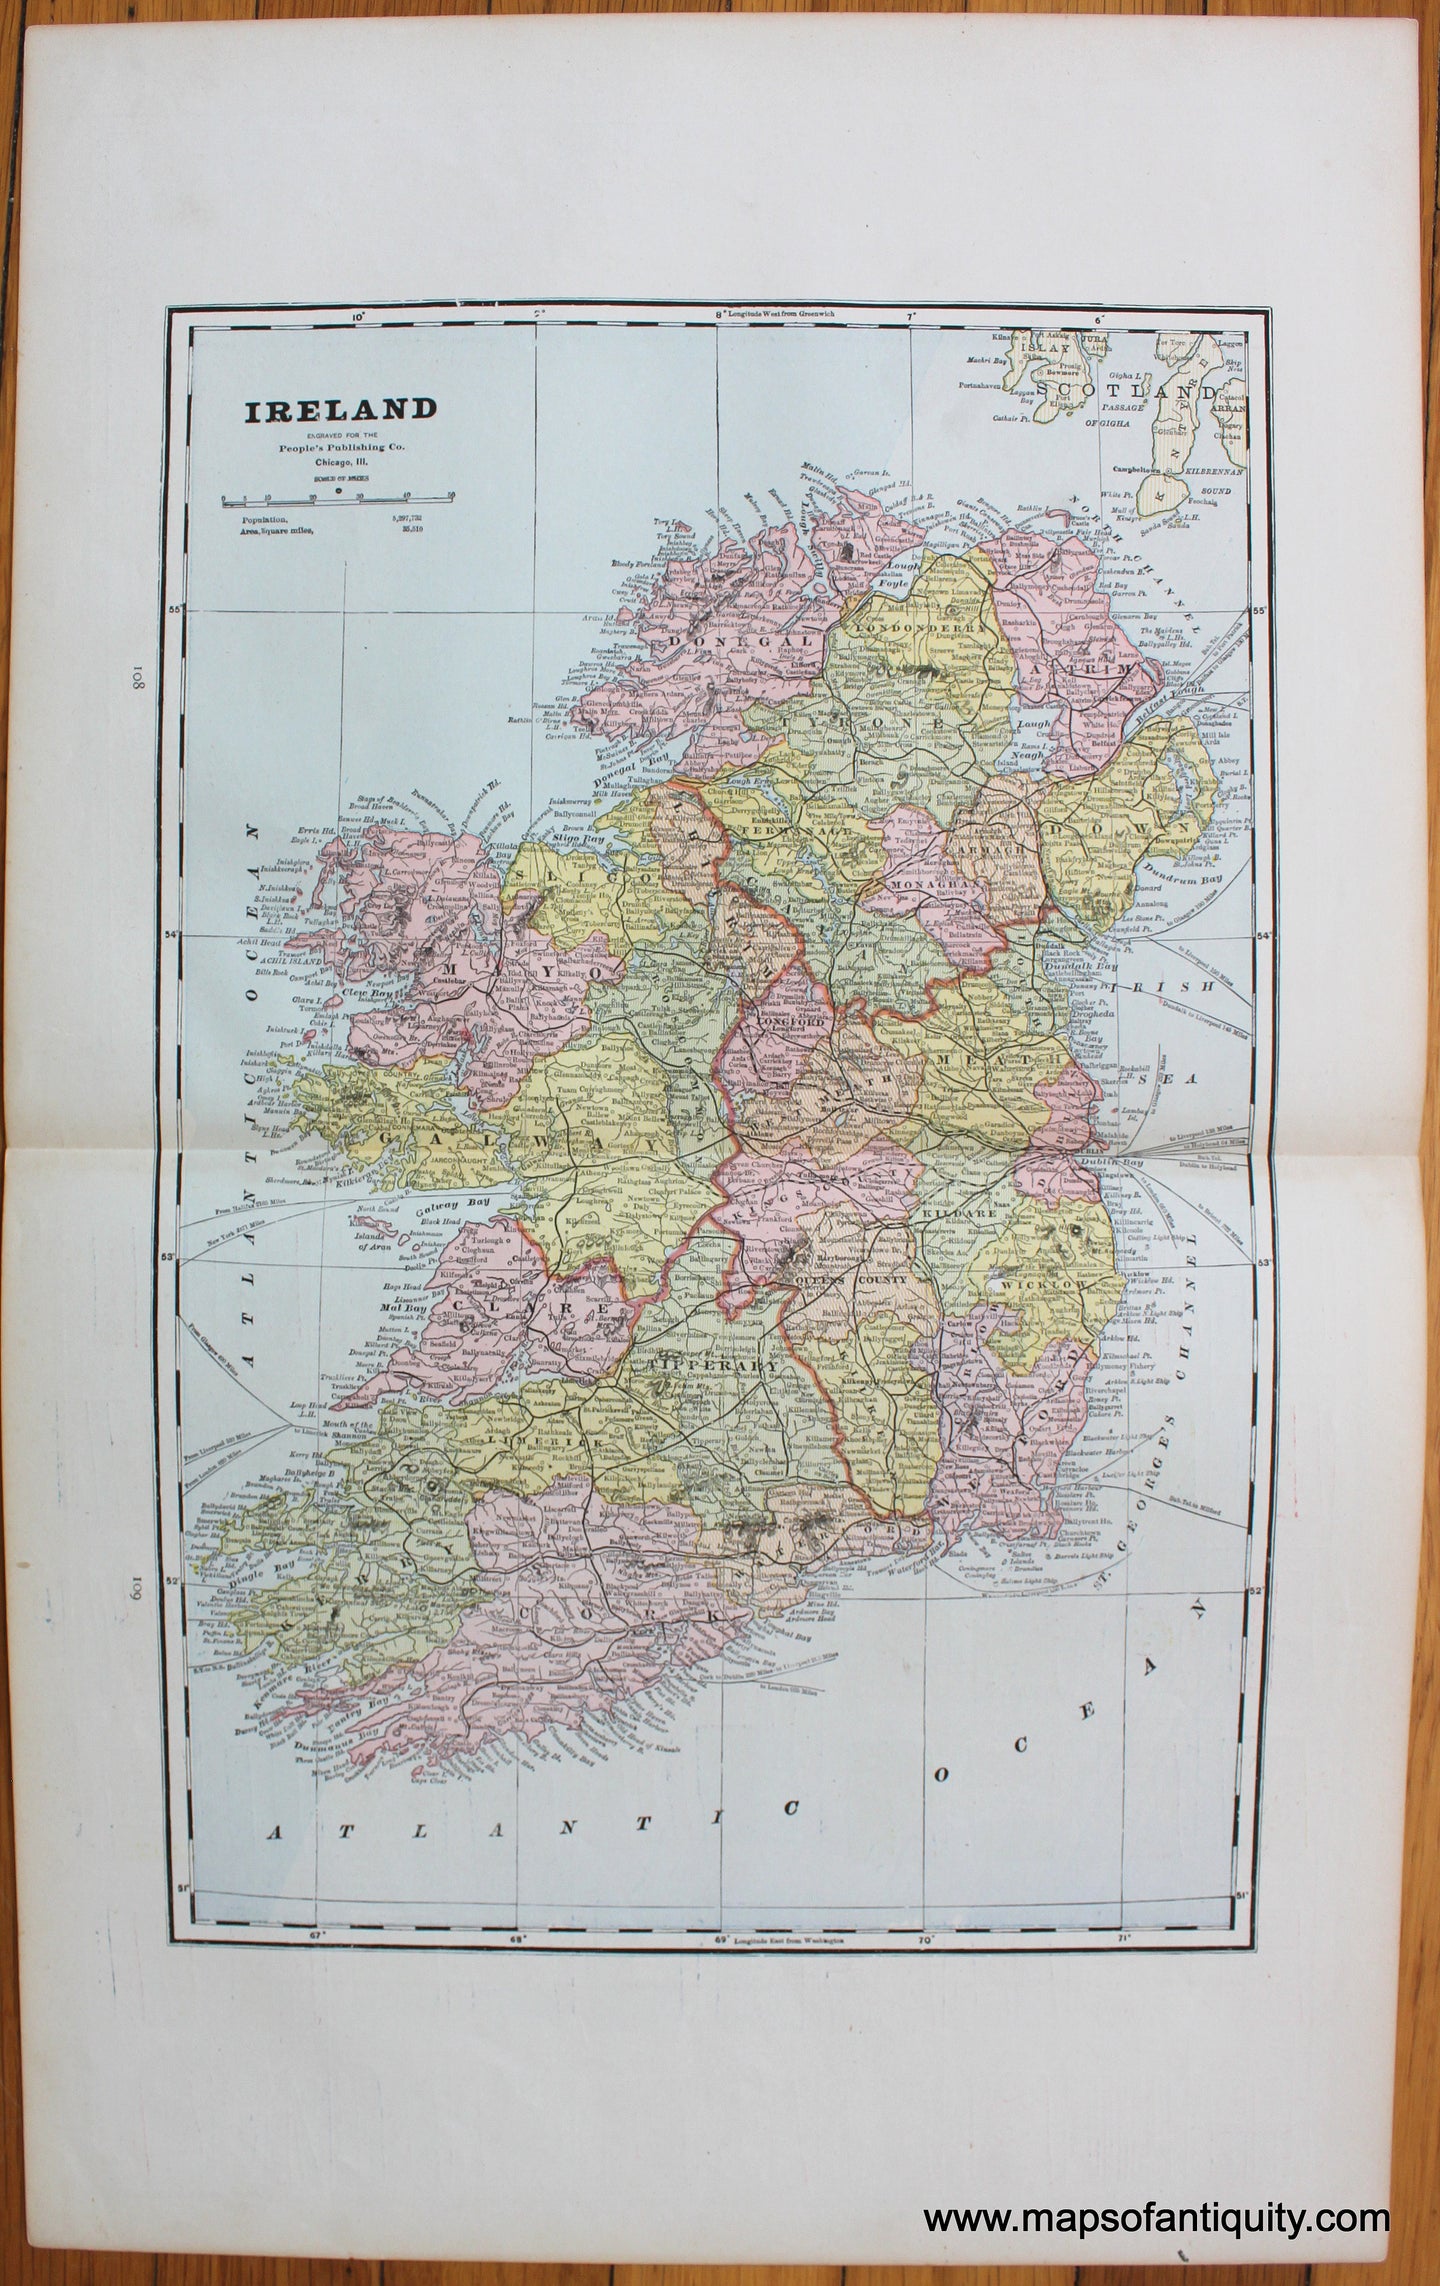 Antique-Printed-Color-Map-Ireland;-verso:-Map-of-the-Polar-Regions-Showing-the-recent-Arctic-Discoveries-Flags-of-all-Nations-1888-PeopleÃ¢â‚¬â„¢s-Publishing-Company-Ireland-Polar-1800s-19th-century-Maps-of-Antiquity